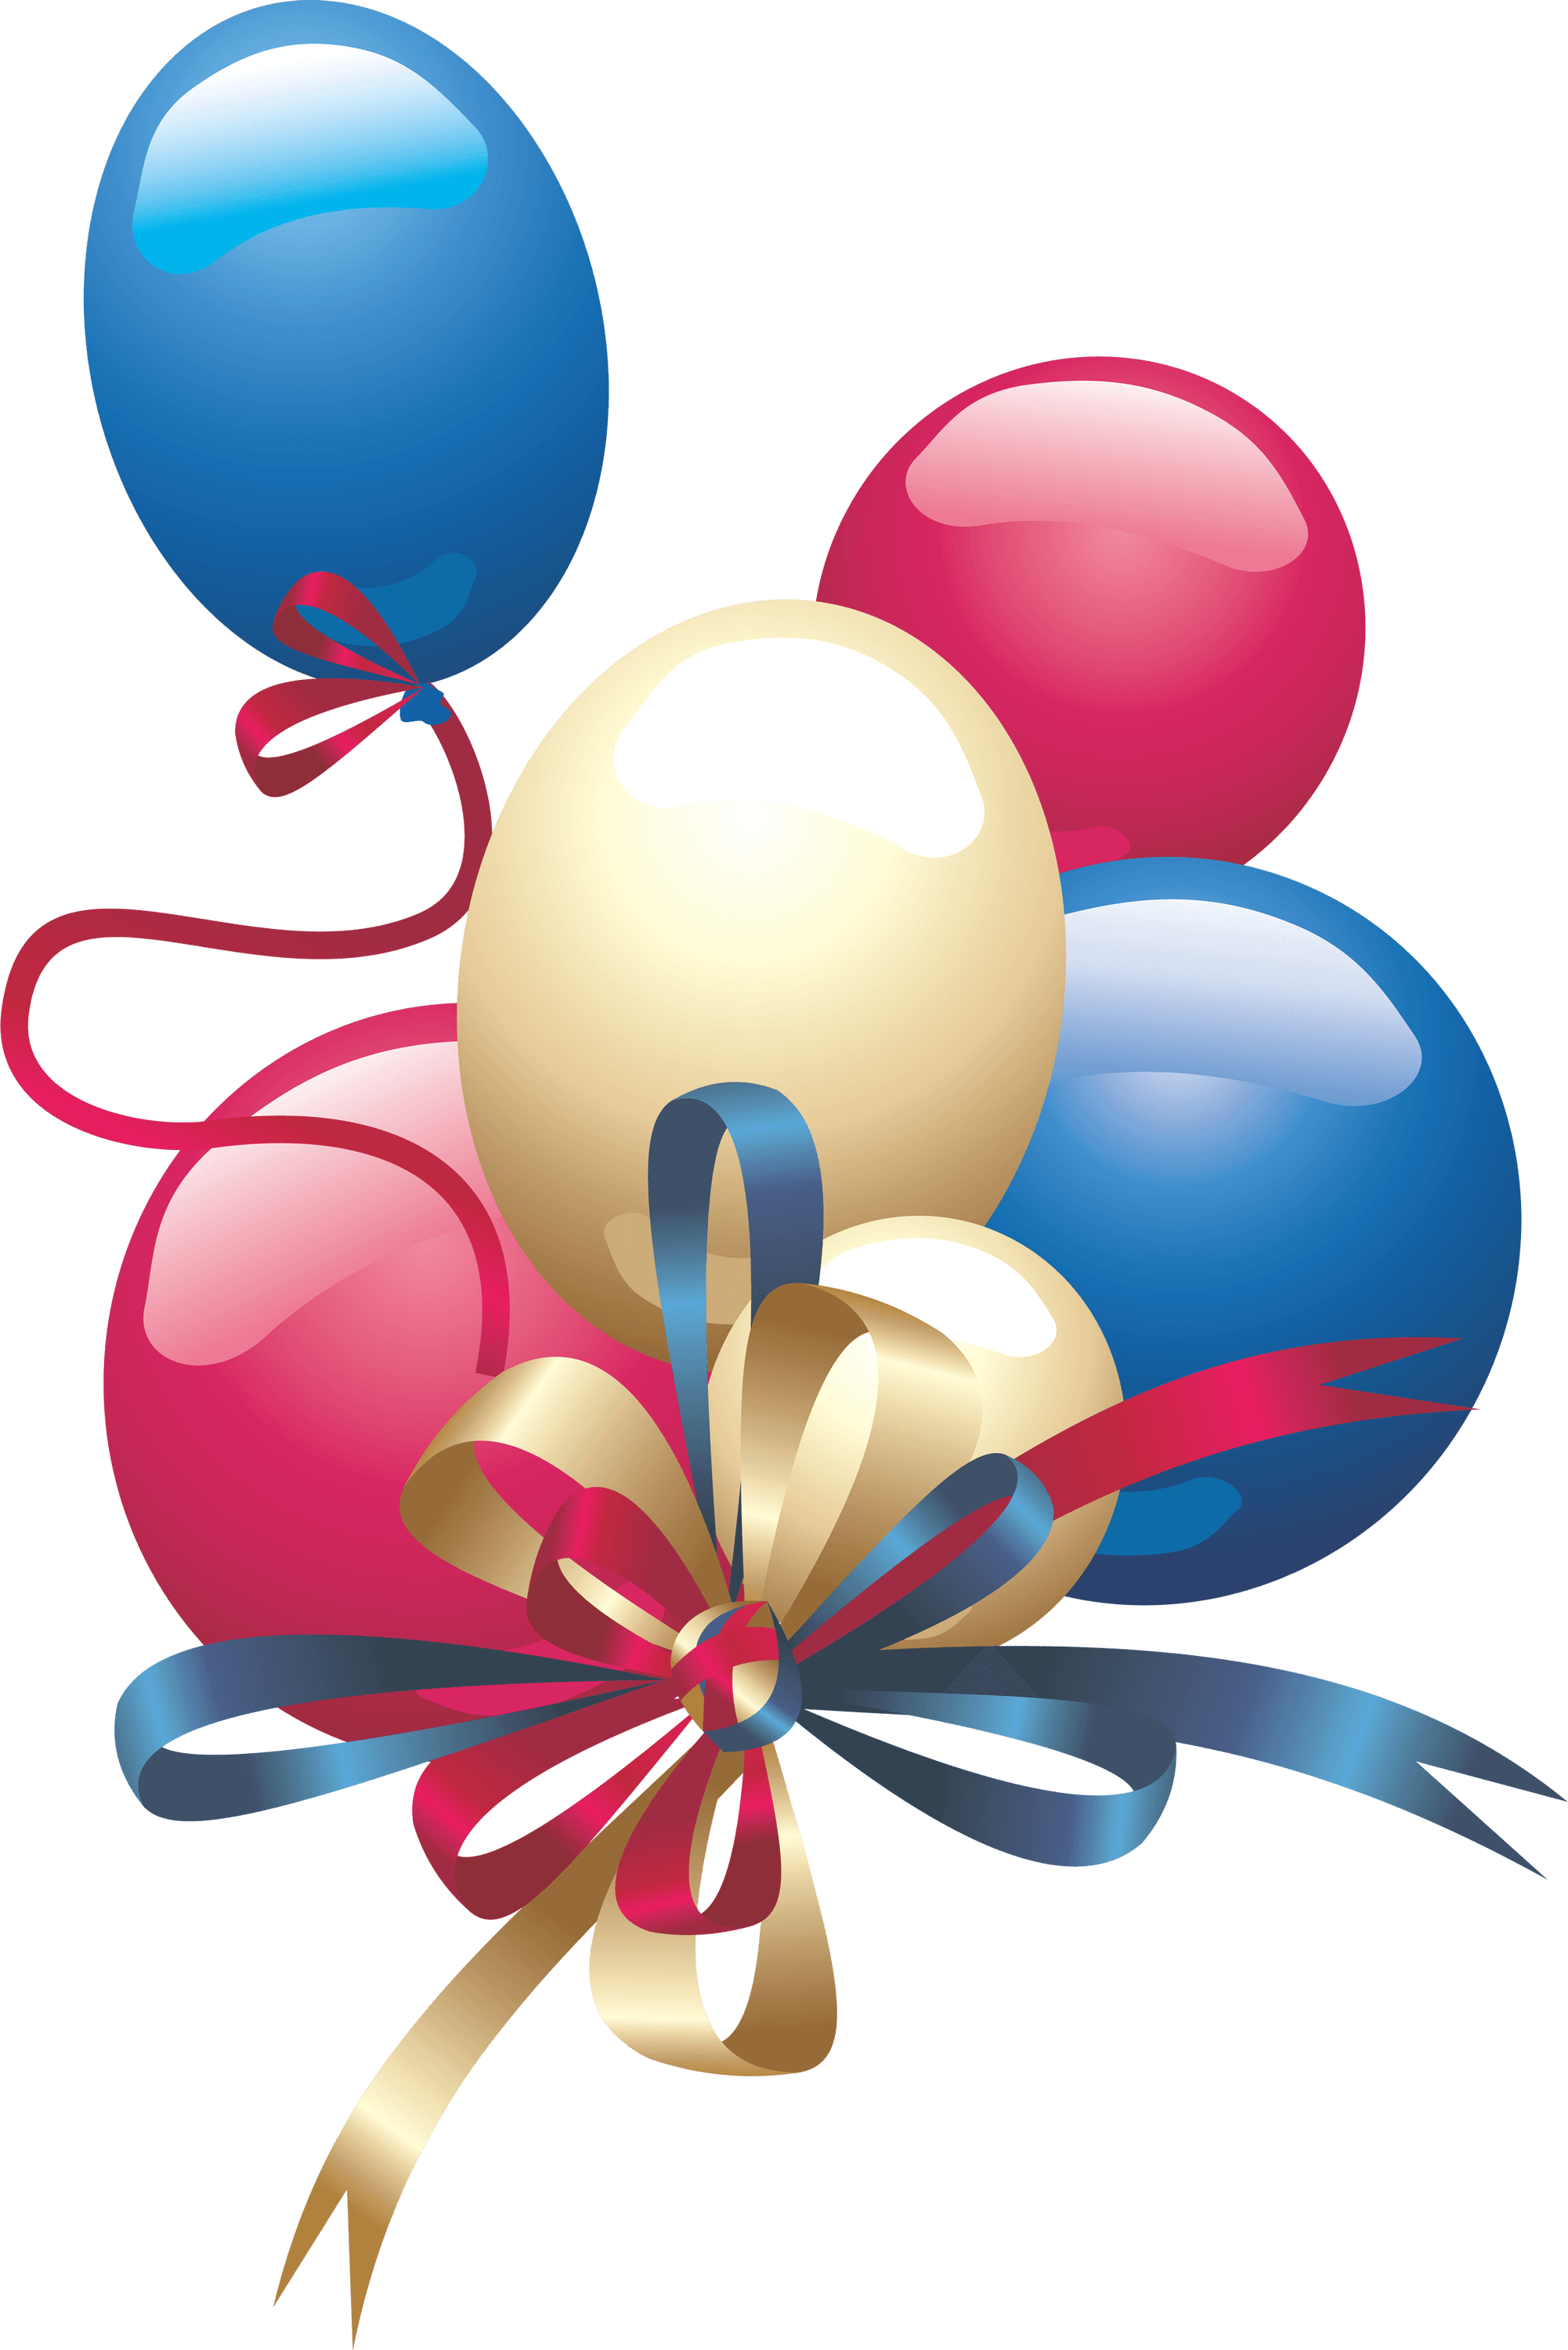 Party Balloon Birthday Colored Download Free Image PNG Image